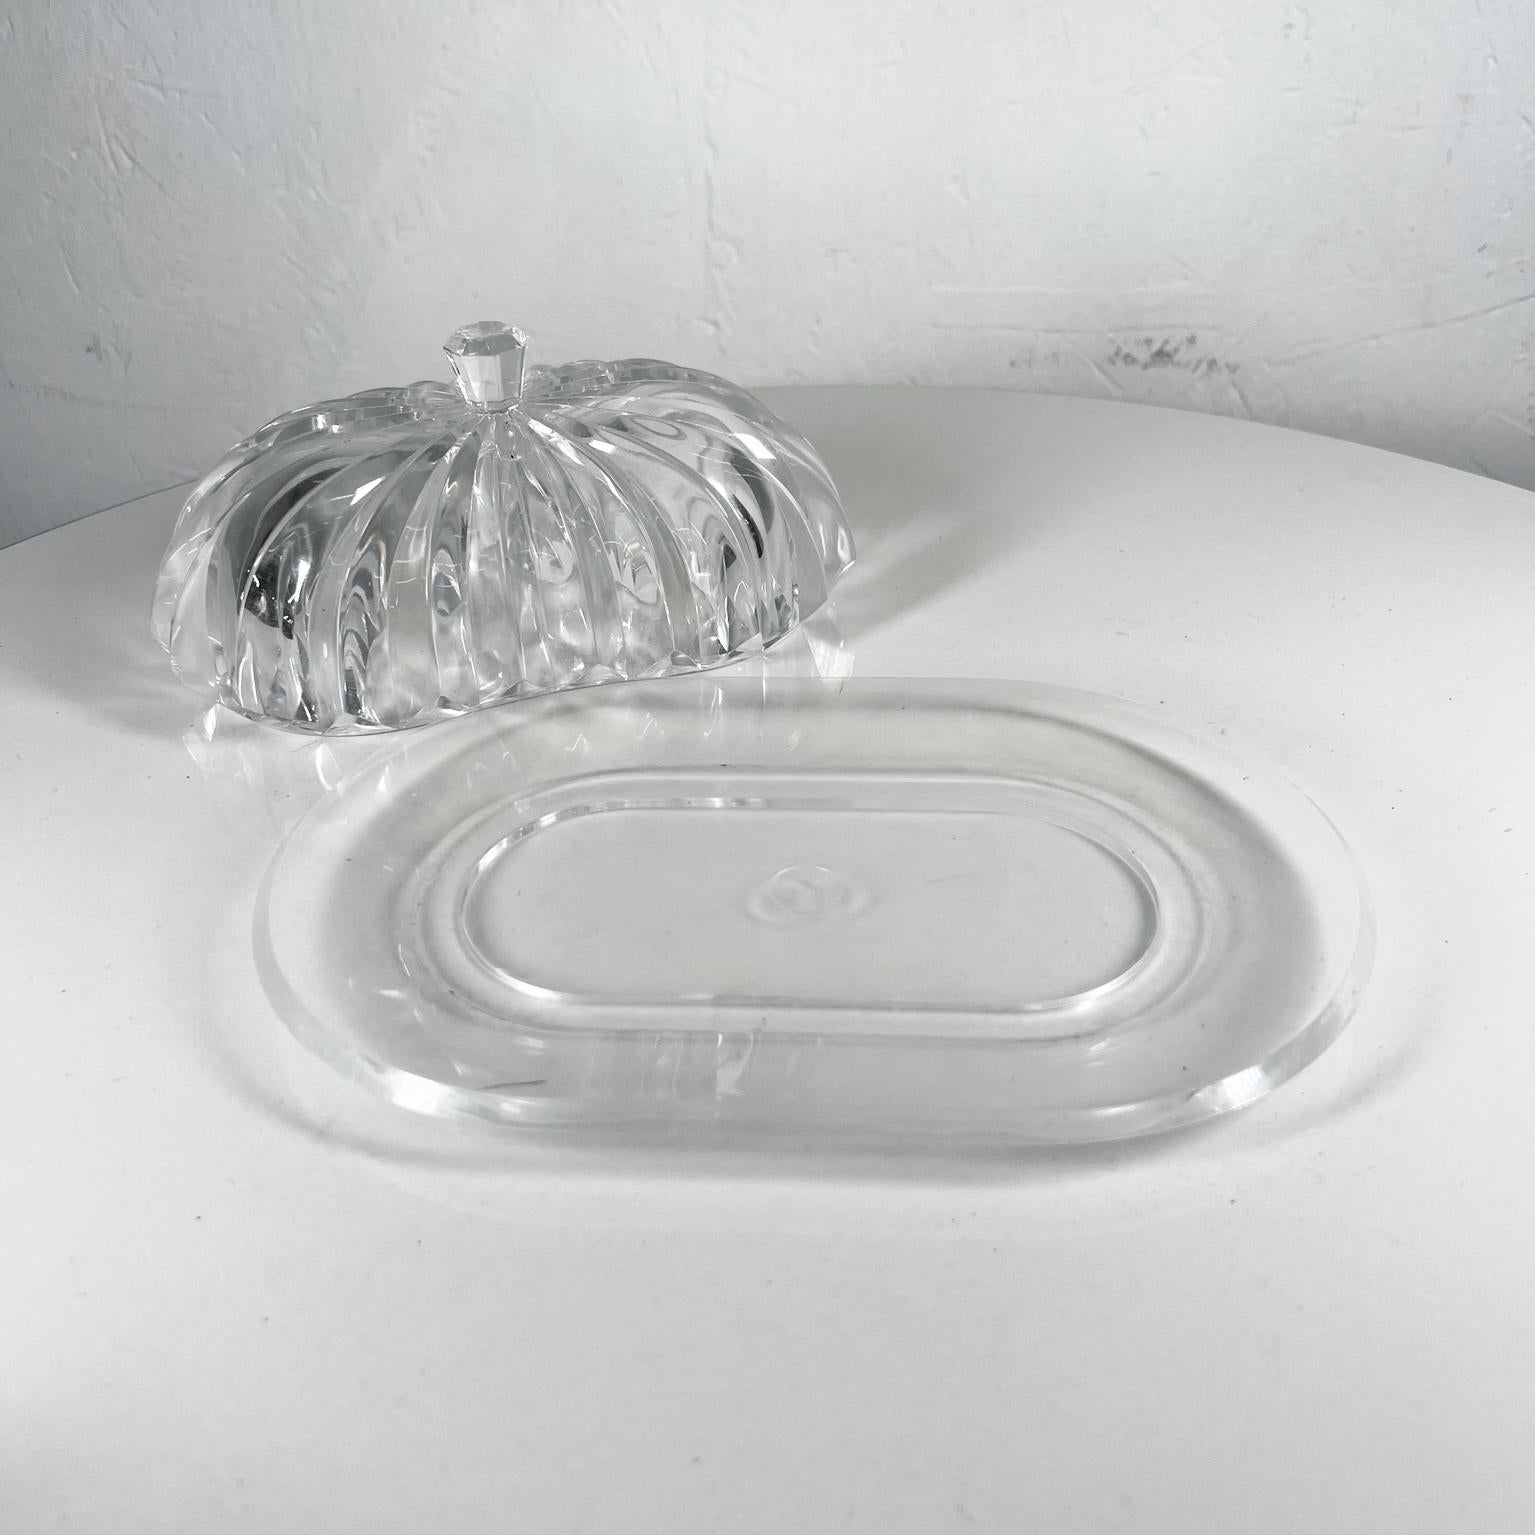 American 1970s Modern Ribbed Butter Dish Tiara Lucite Grainware by William Bounds